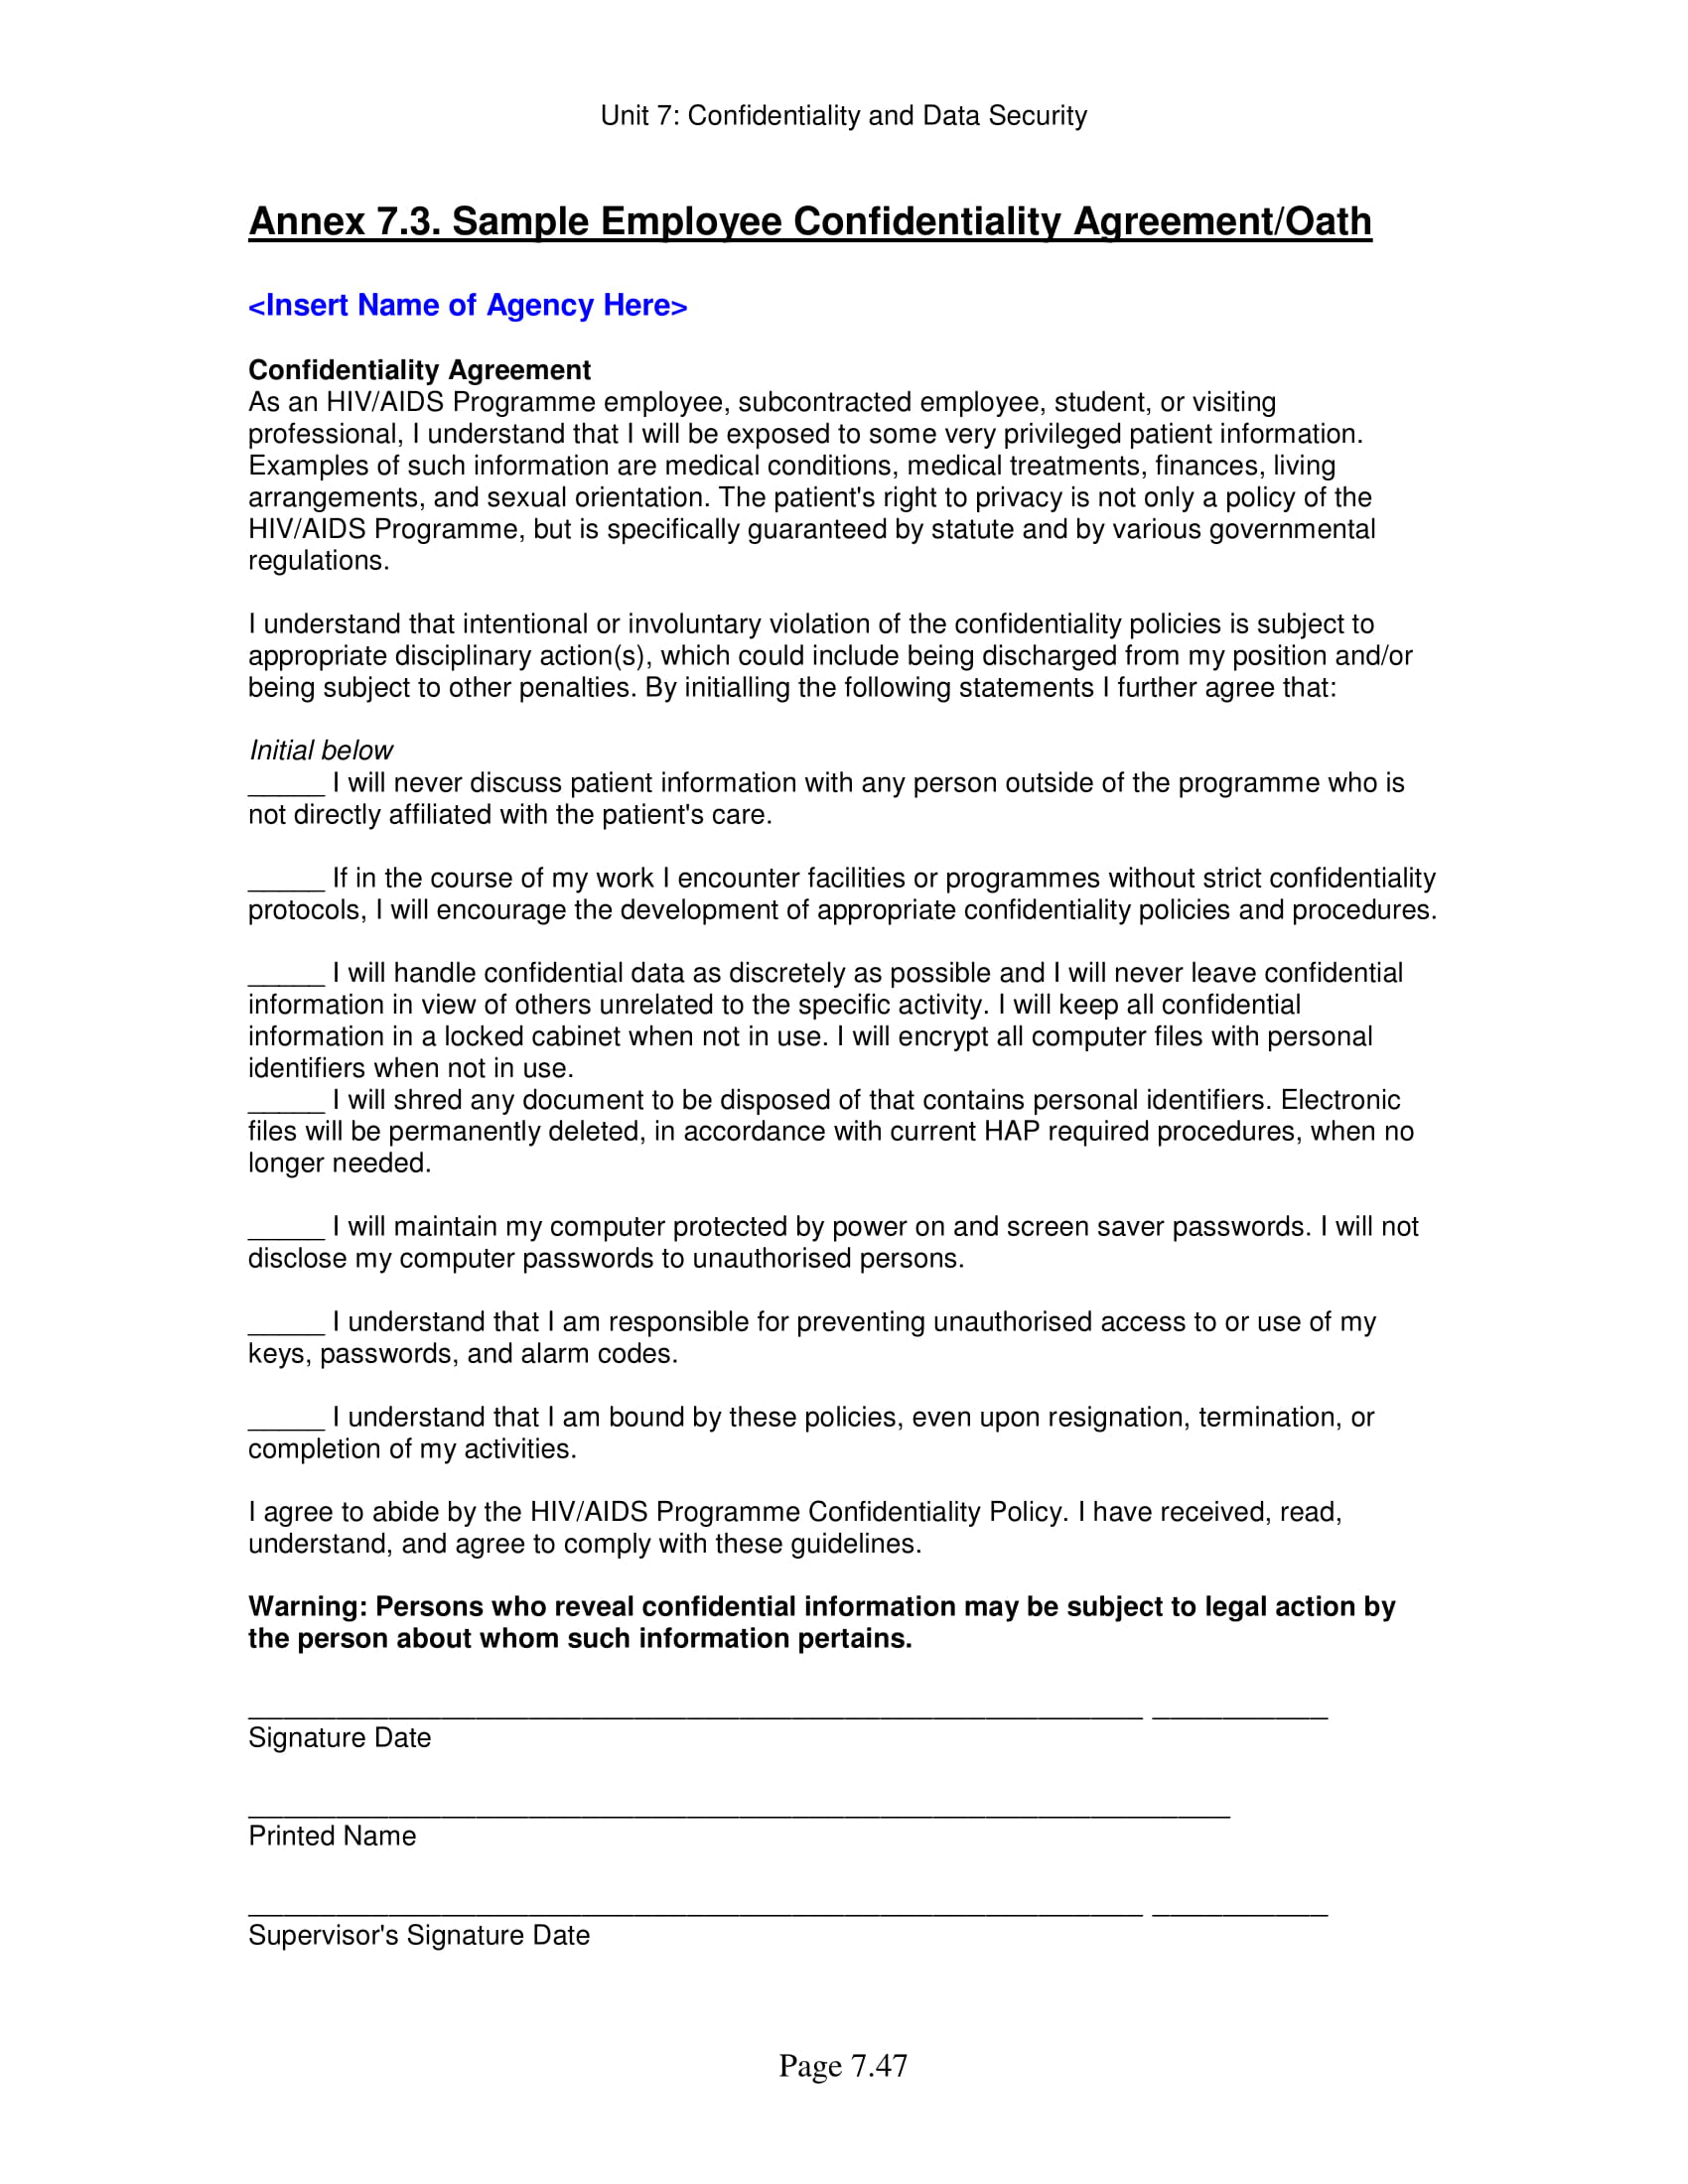 Simple Confidentiality Agreement Sample 11 Employee Confidentiality Agreement Examples Pdf Word Examples